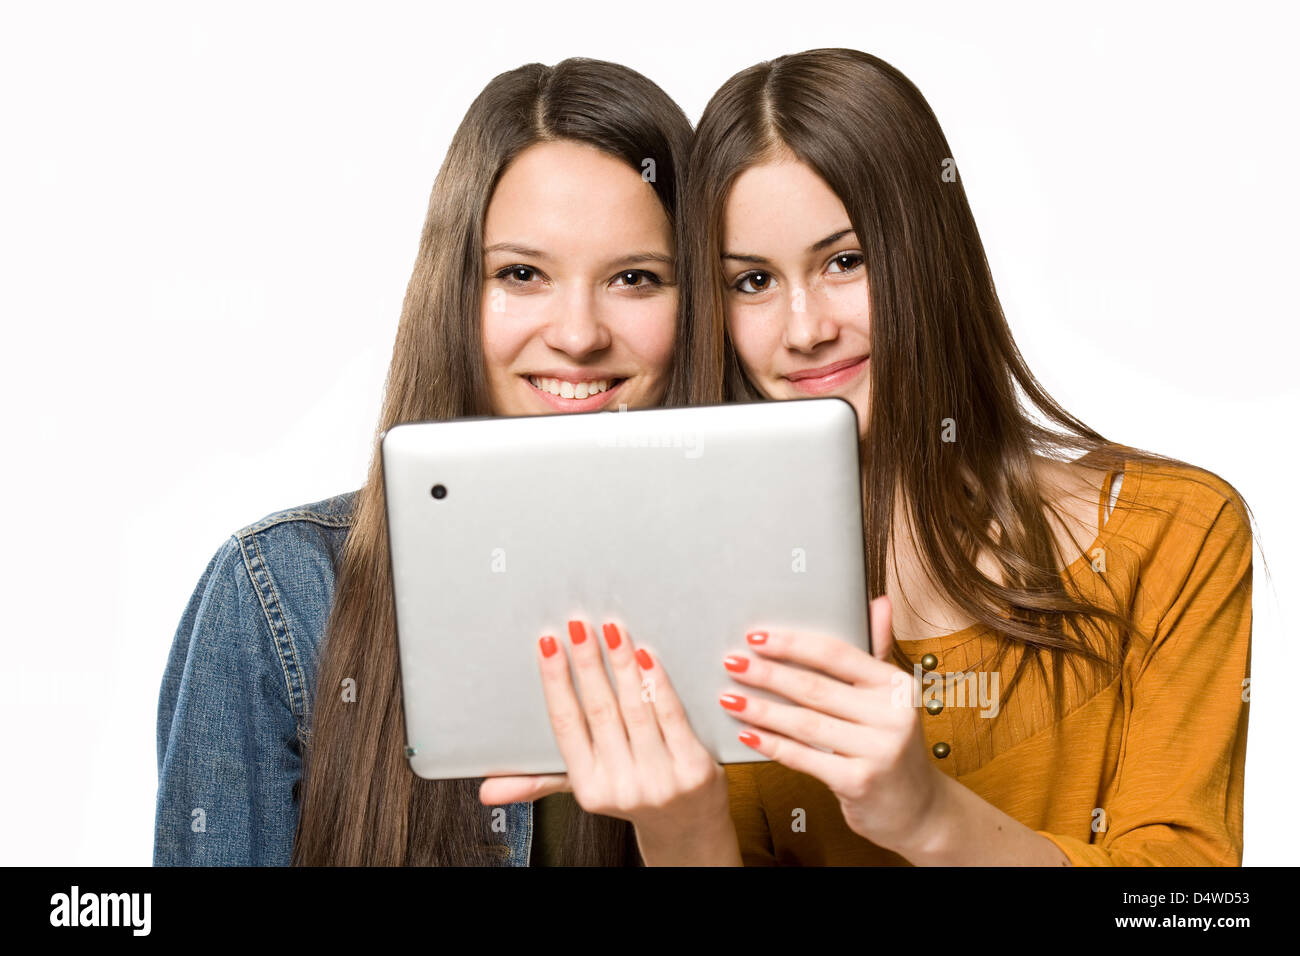 Portrait of a cute teen girls sharing a tablet computer. Stock Photo